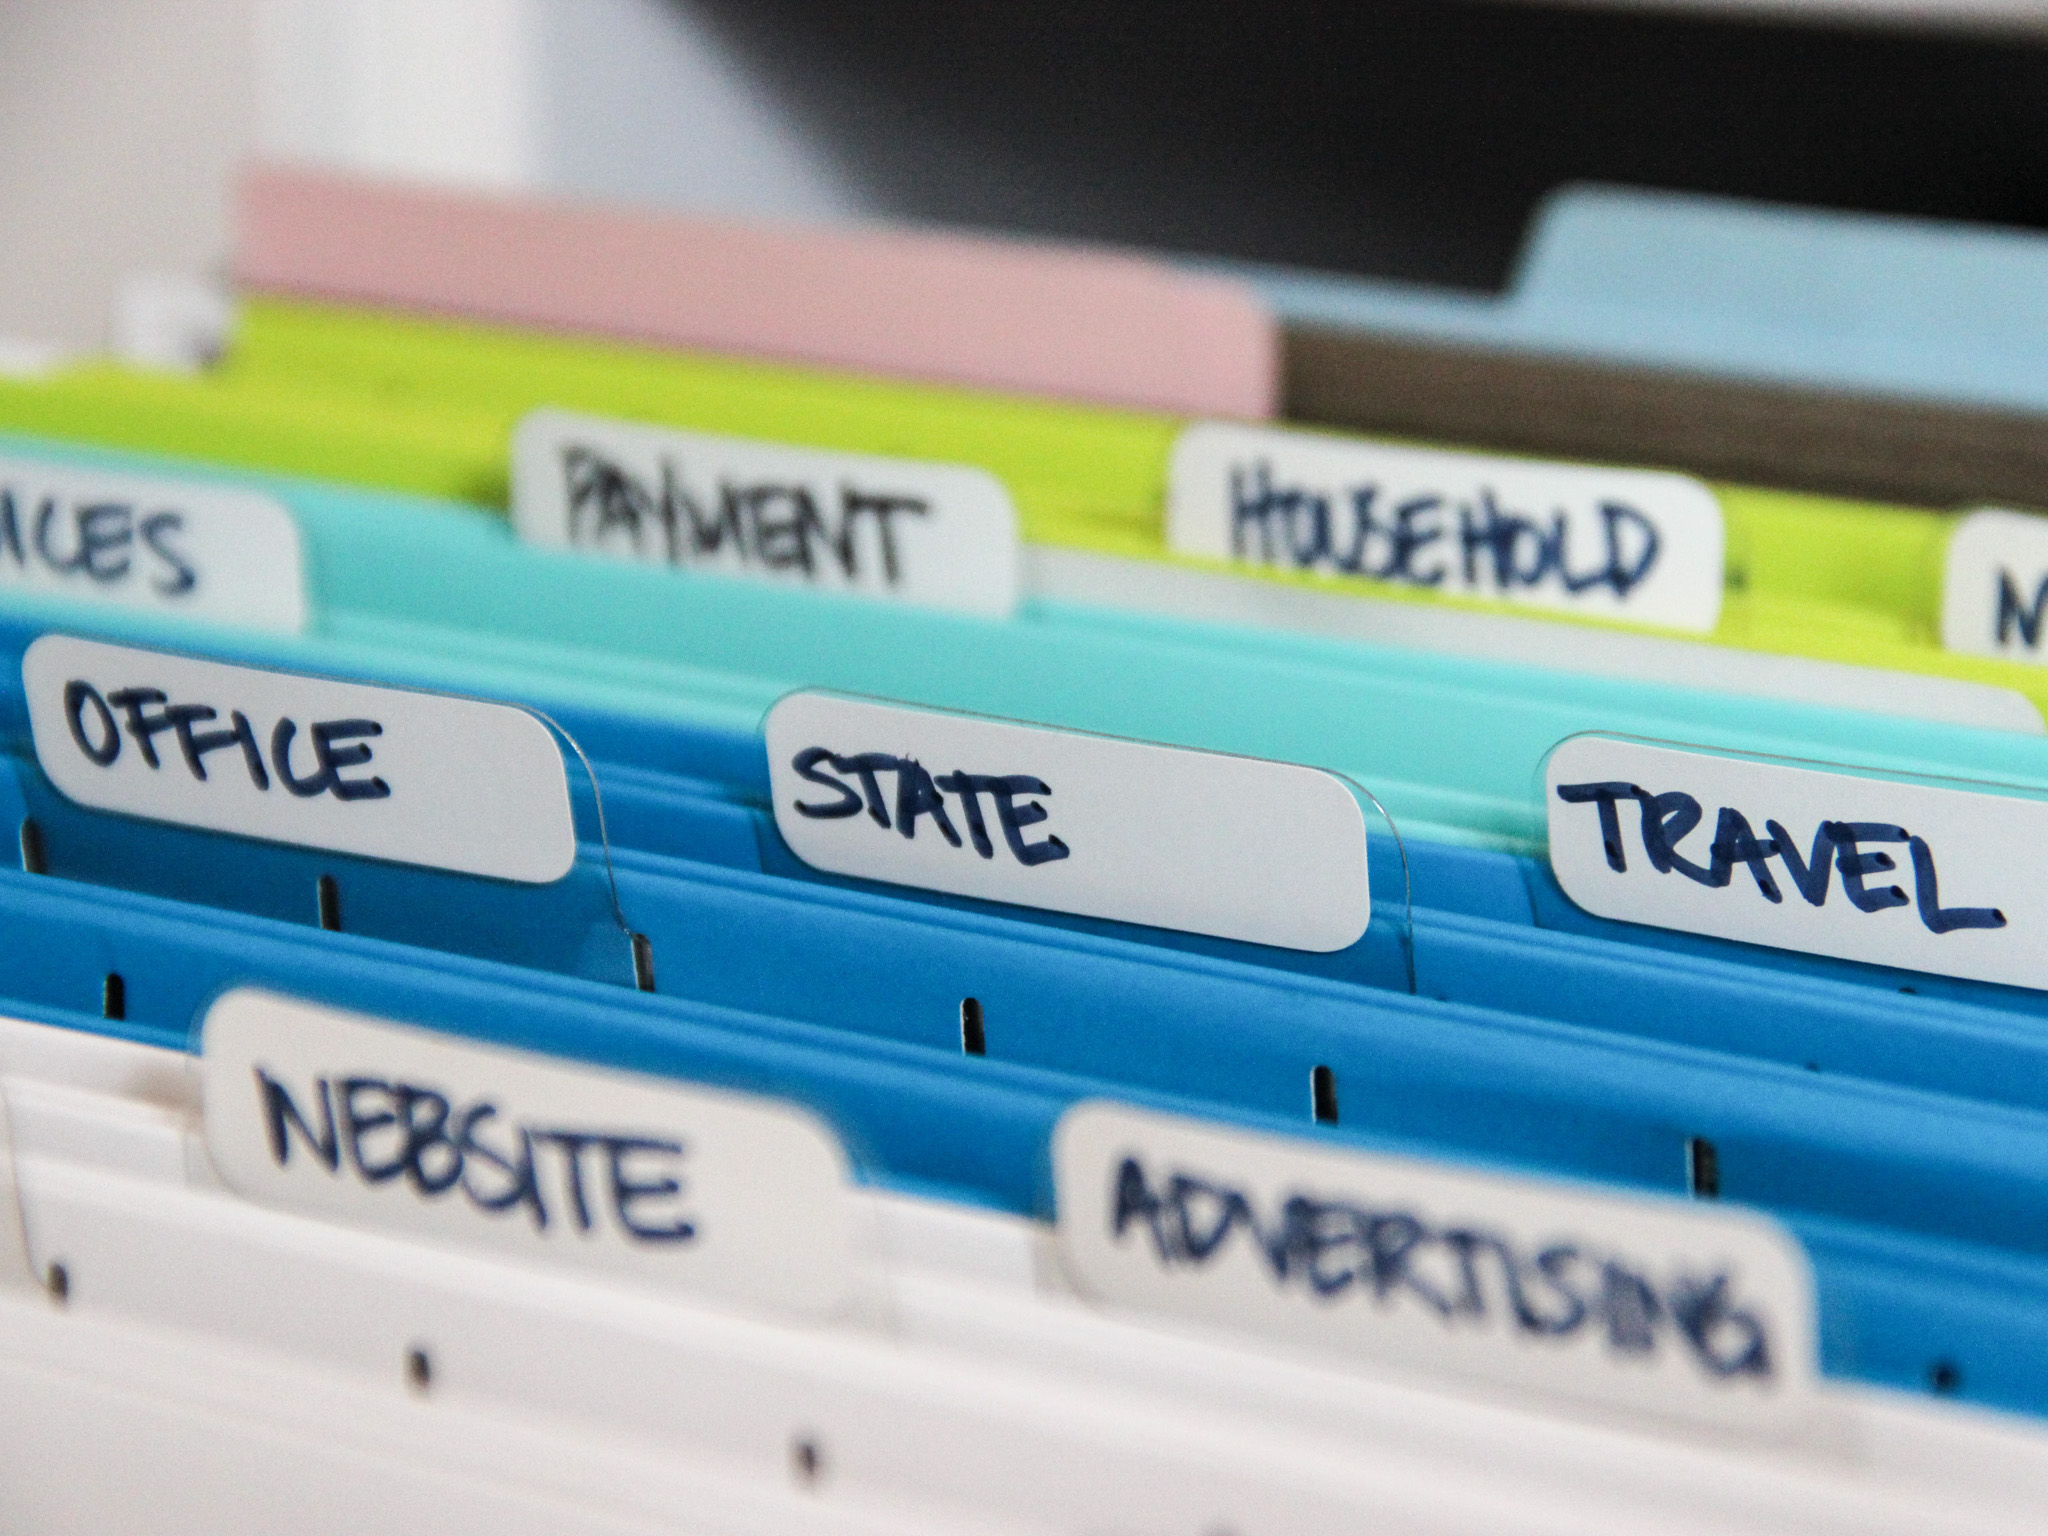 how to organize your bills filing system